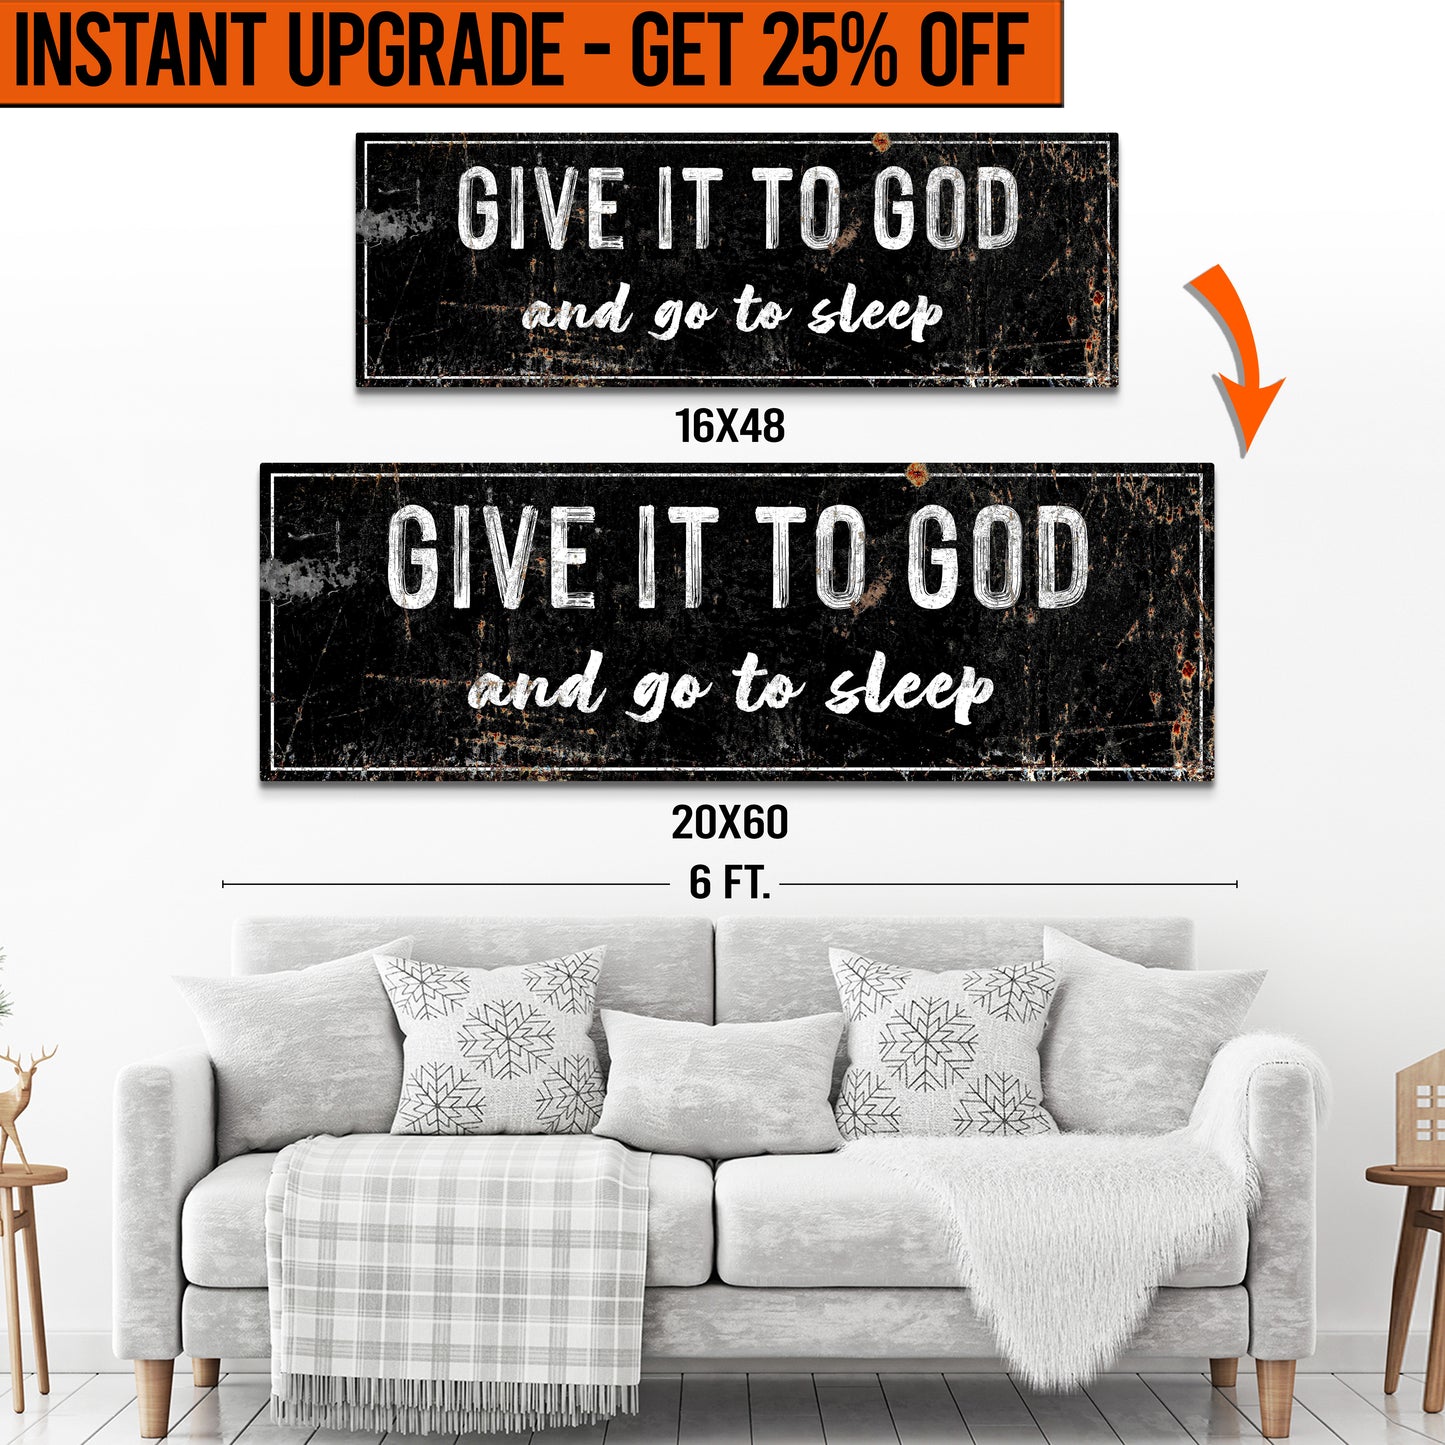 Upgrade Your 16x48 Inches 'Give it to God and Go to Sleep' (Style 2) Canvas To 20x60 Inches